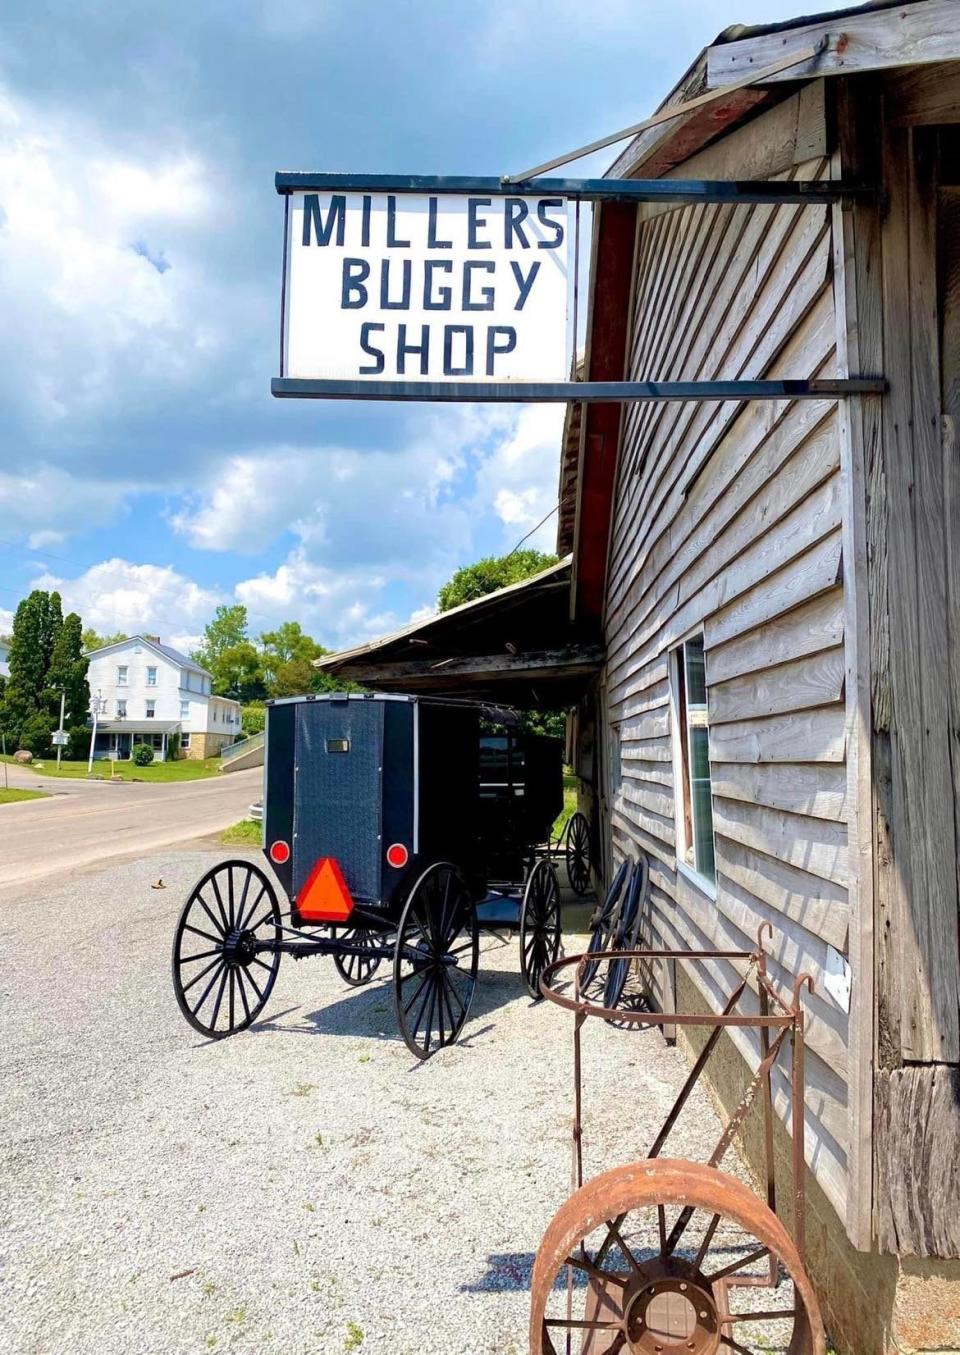 Summer is an ideal time to visit Amish country in Millersburg, Kidron, Sugarcreek and Walnut Creek. Tourist activities include buggy rides and homestyle cooking at restaurants.